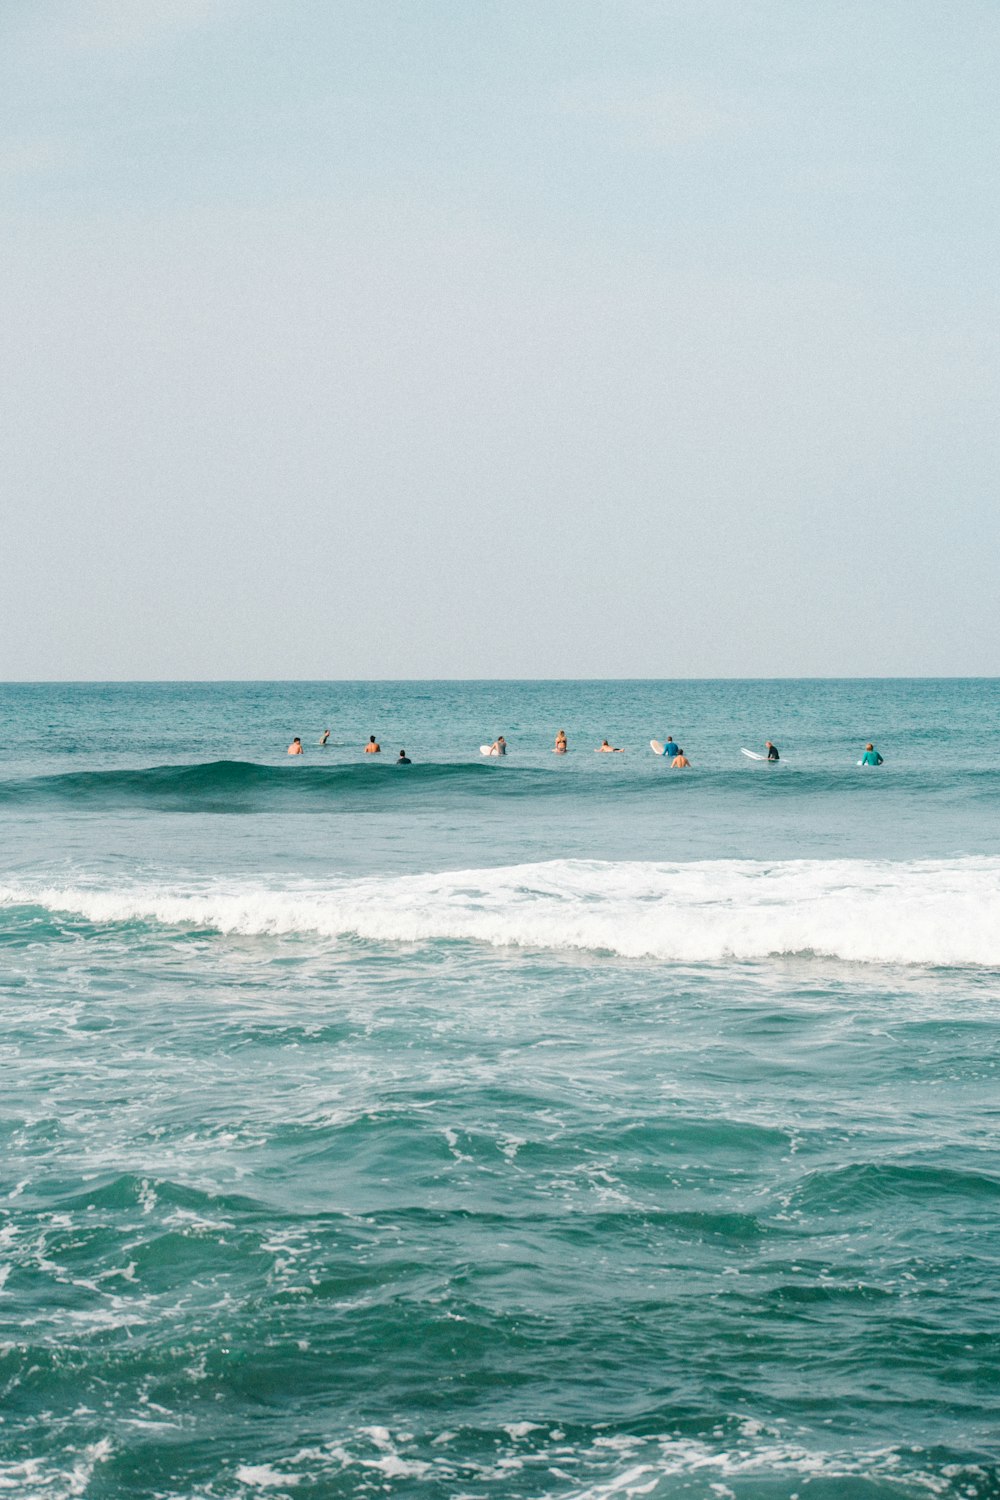 people surfing on sea waves during daytime